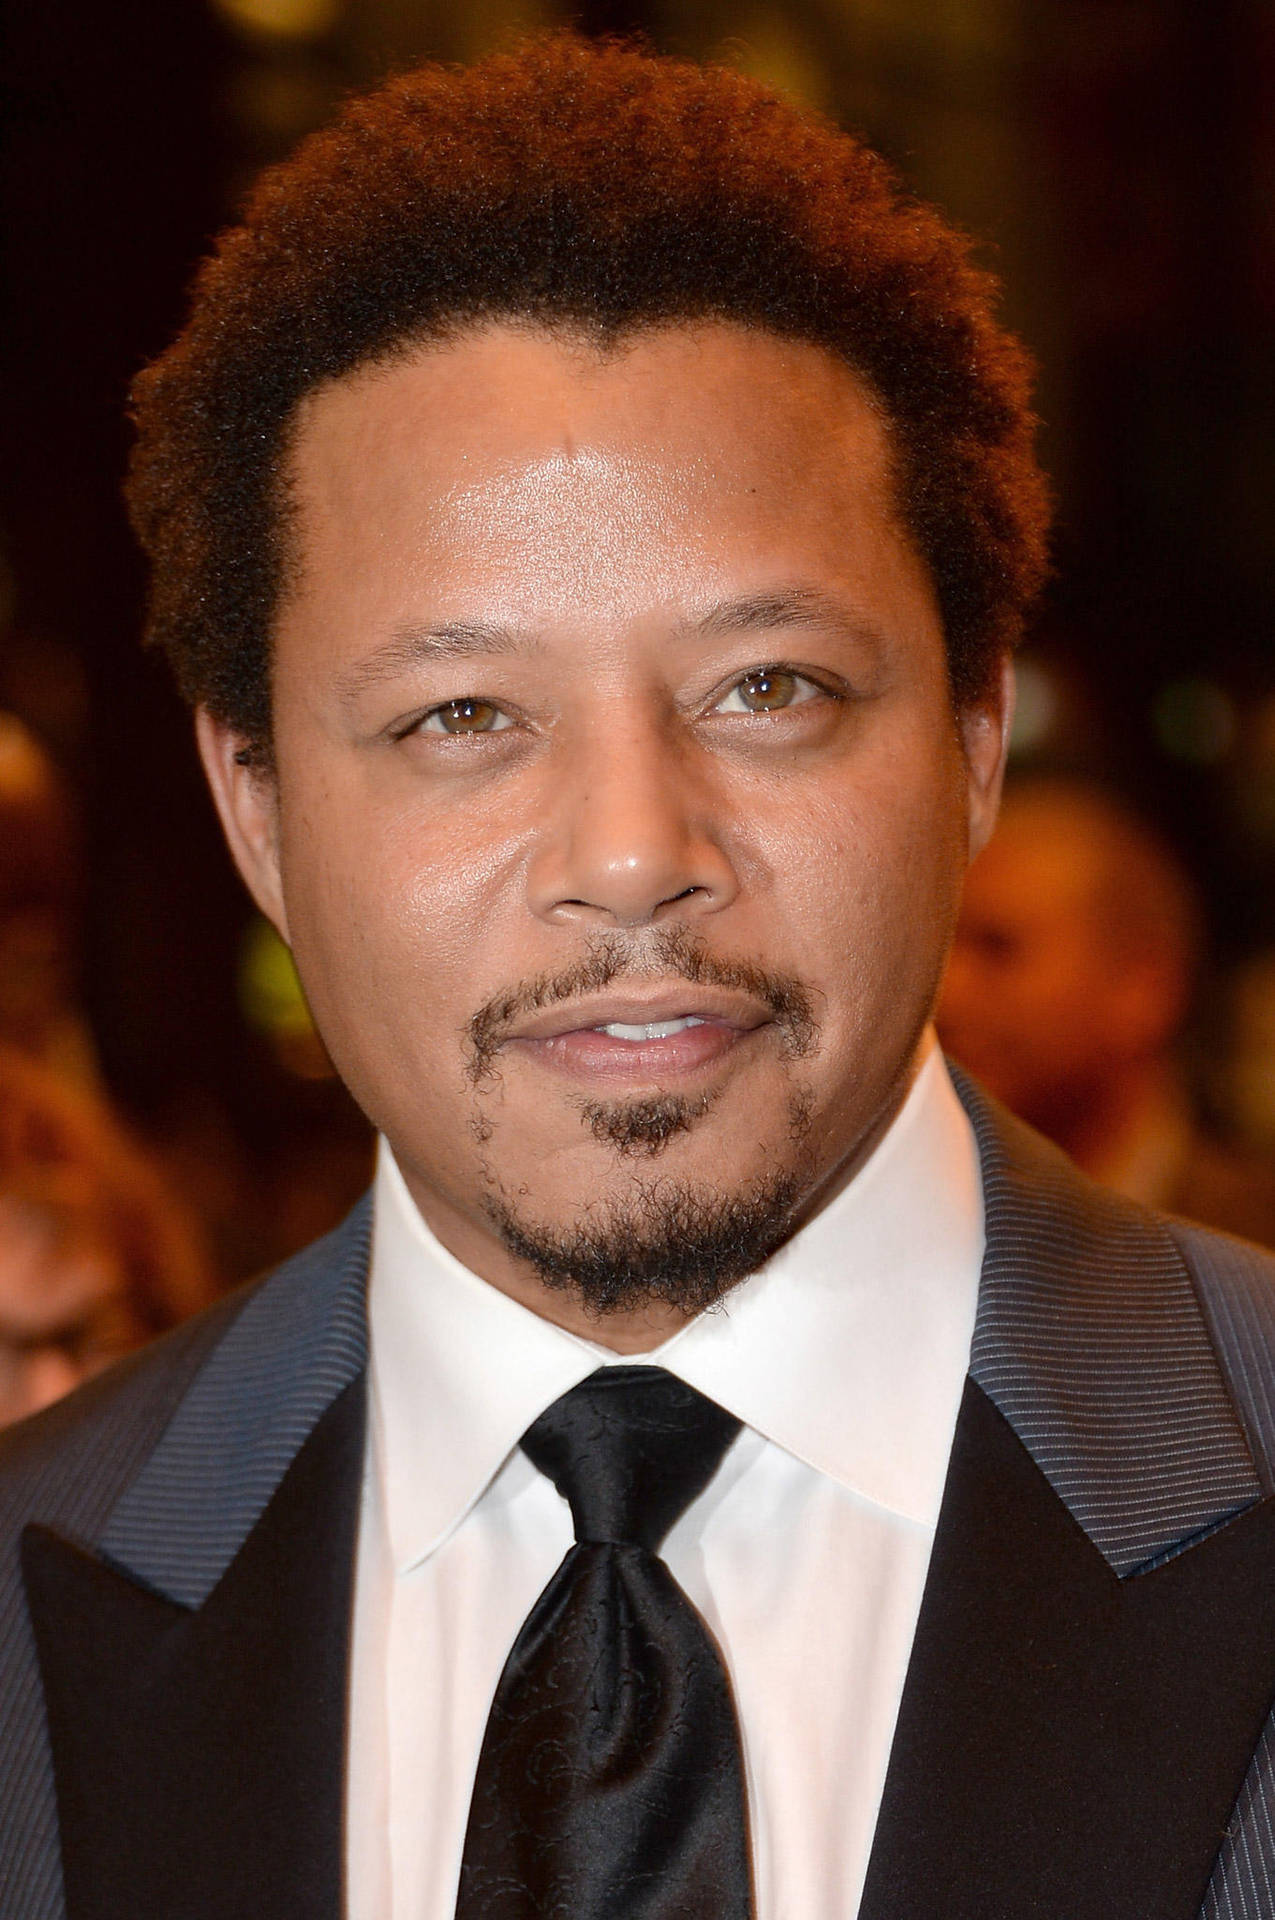 Terrence Howard Looking Distinguished in Gray and Black Suit Wallpaper